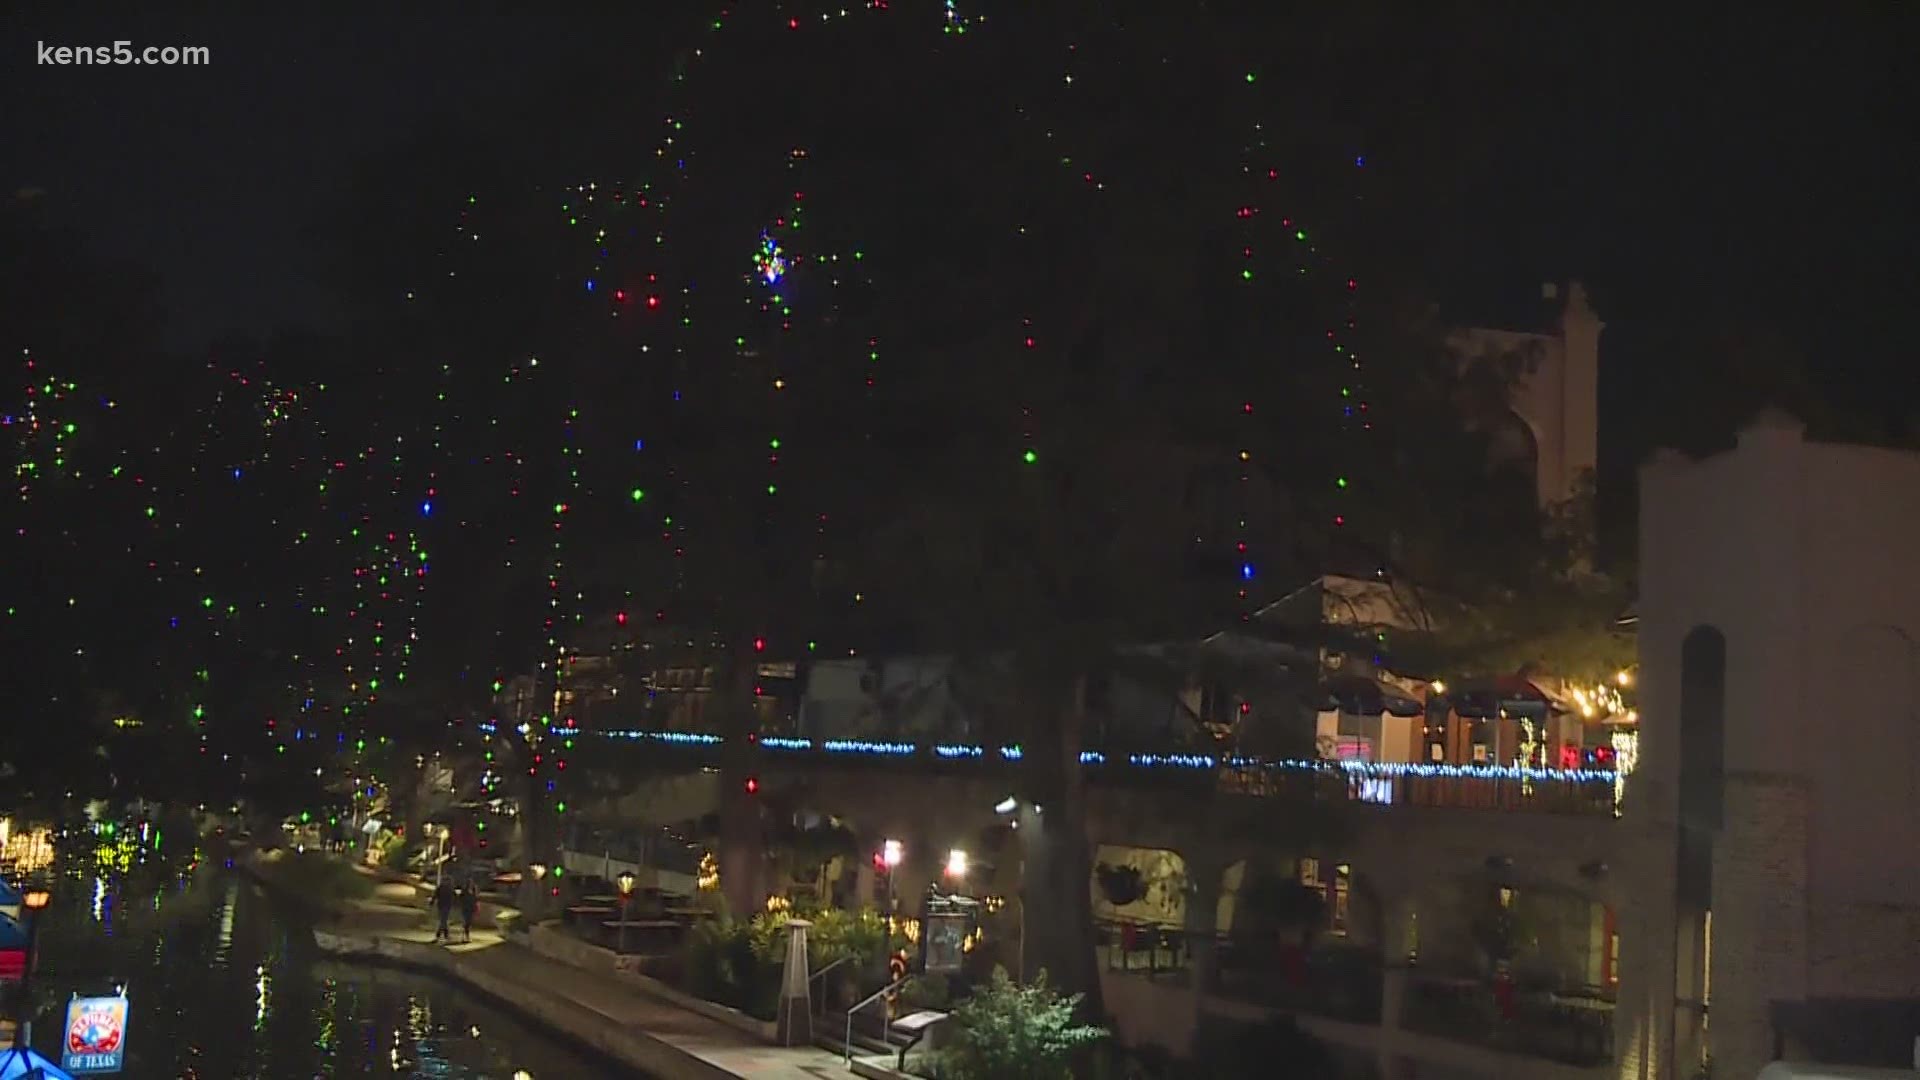 Tuning in from his home while he completes a 2-week quarantine, Mayor Ron Nirenberg counted down to the lighting of the River Walk's beloved holiday lights display.